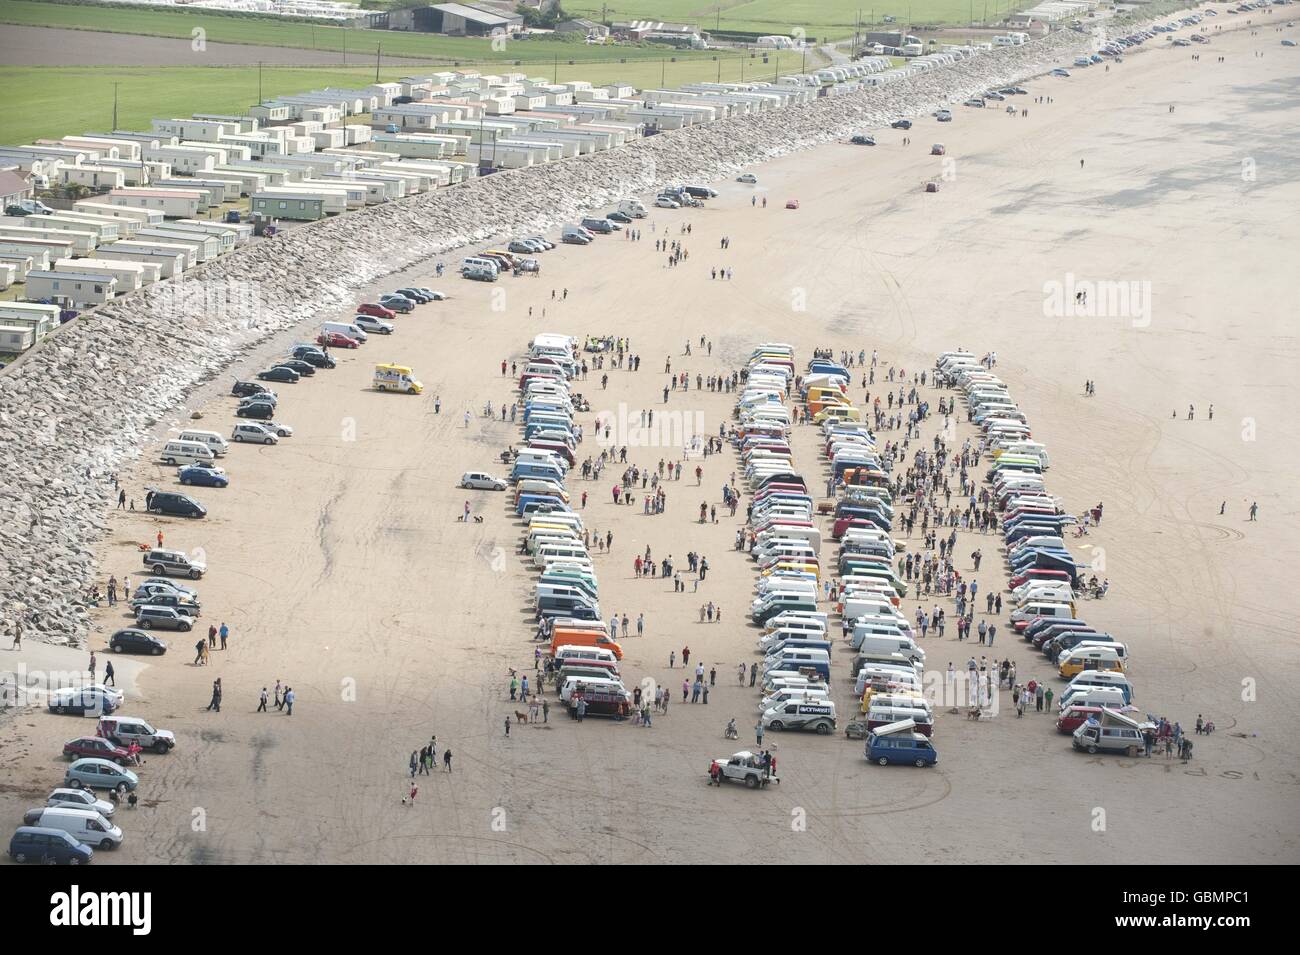 Photo. Volkswagen enthusiasts gather together in fine weather on the beach at Brean Down, as part of VanWest in Somerset. Stock Photo